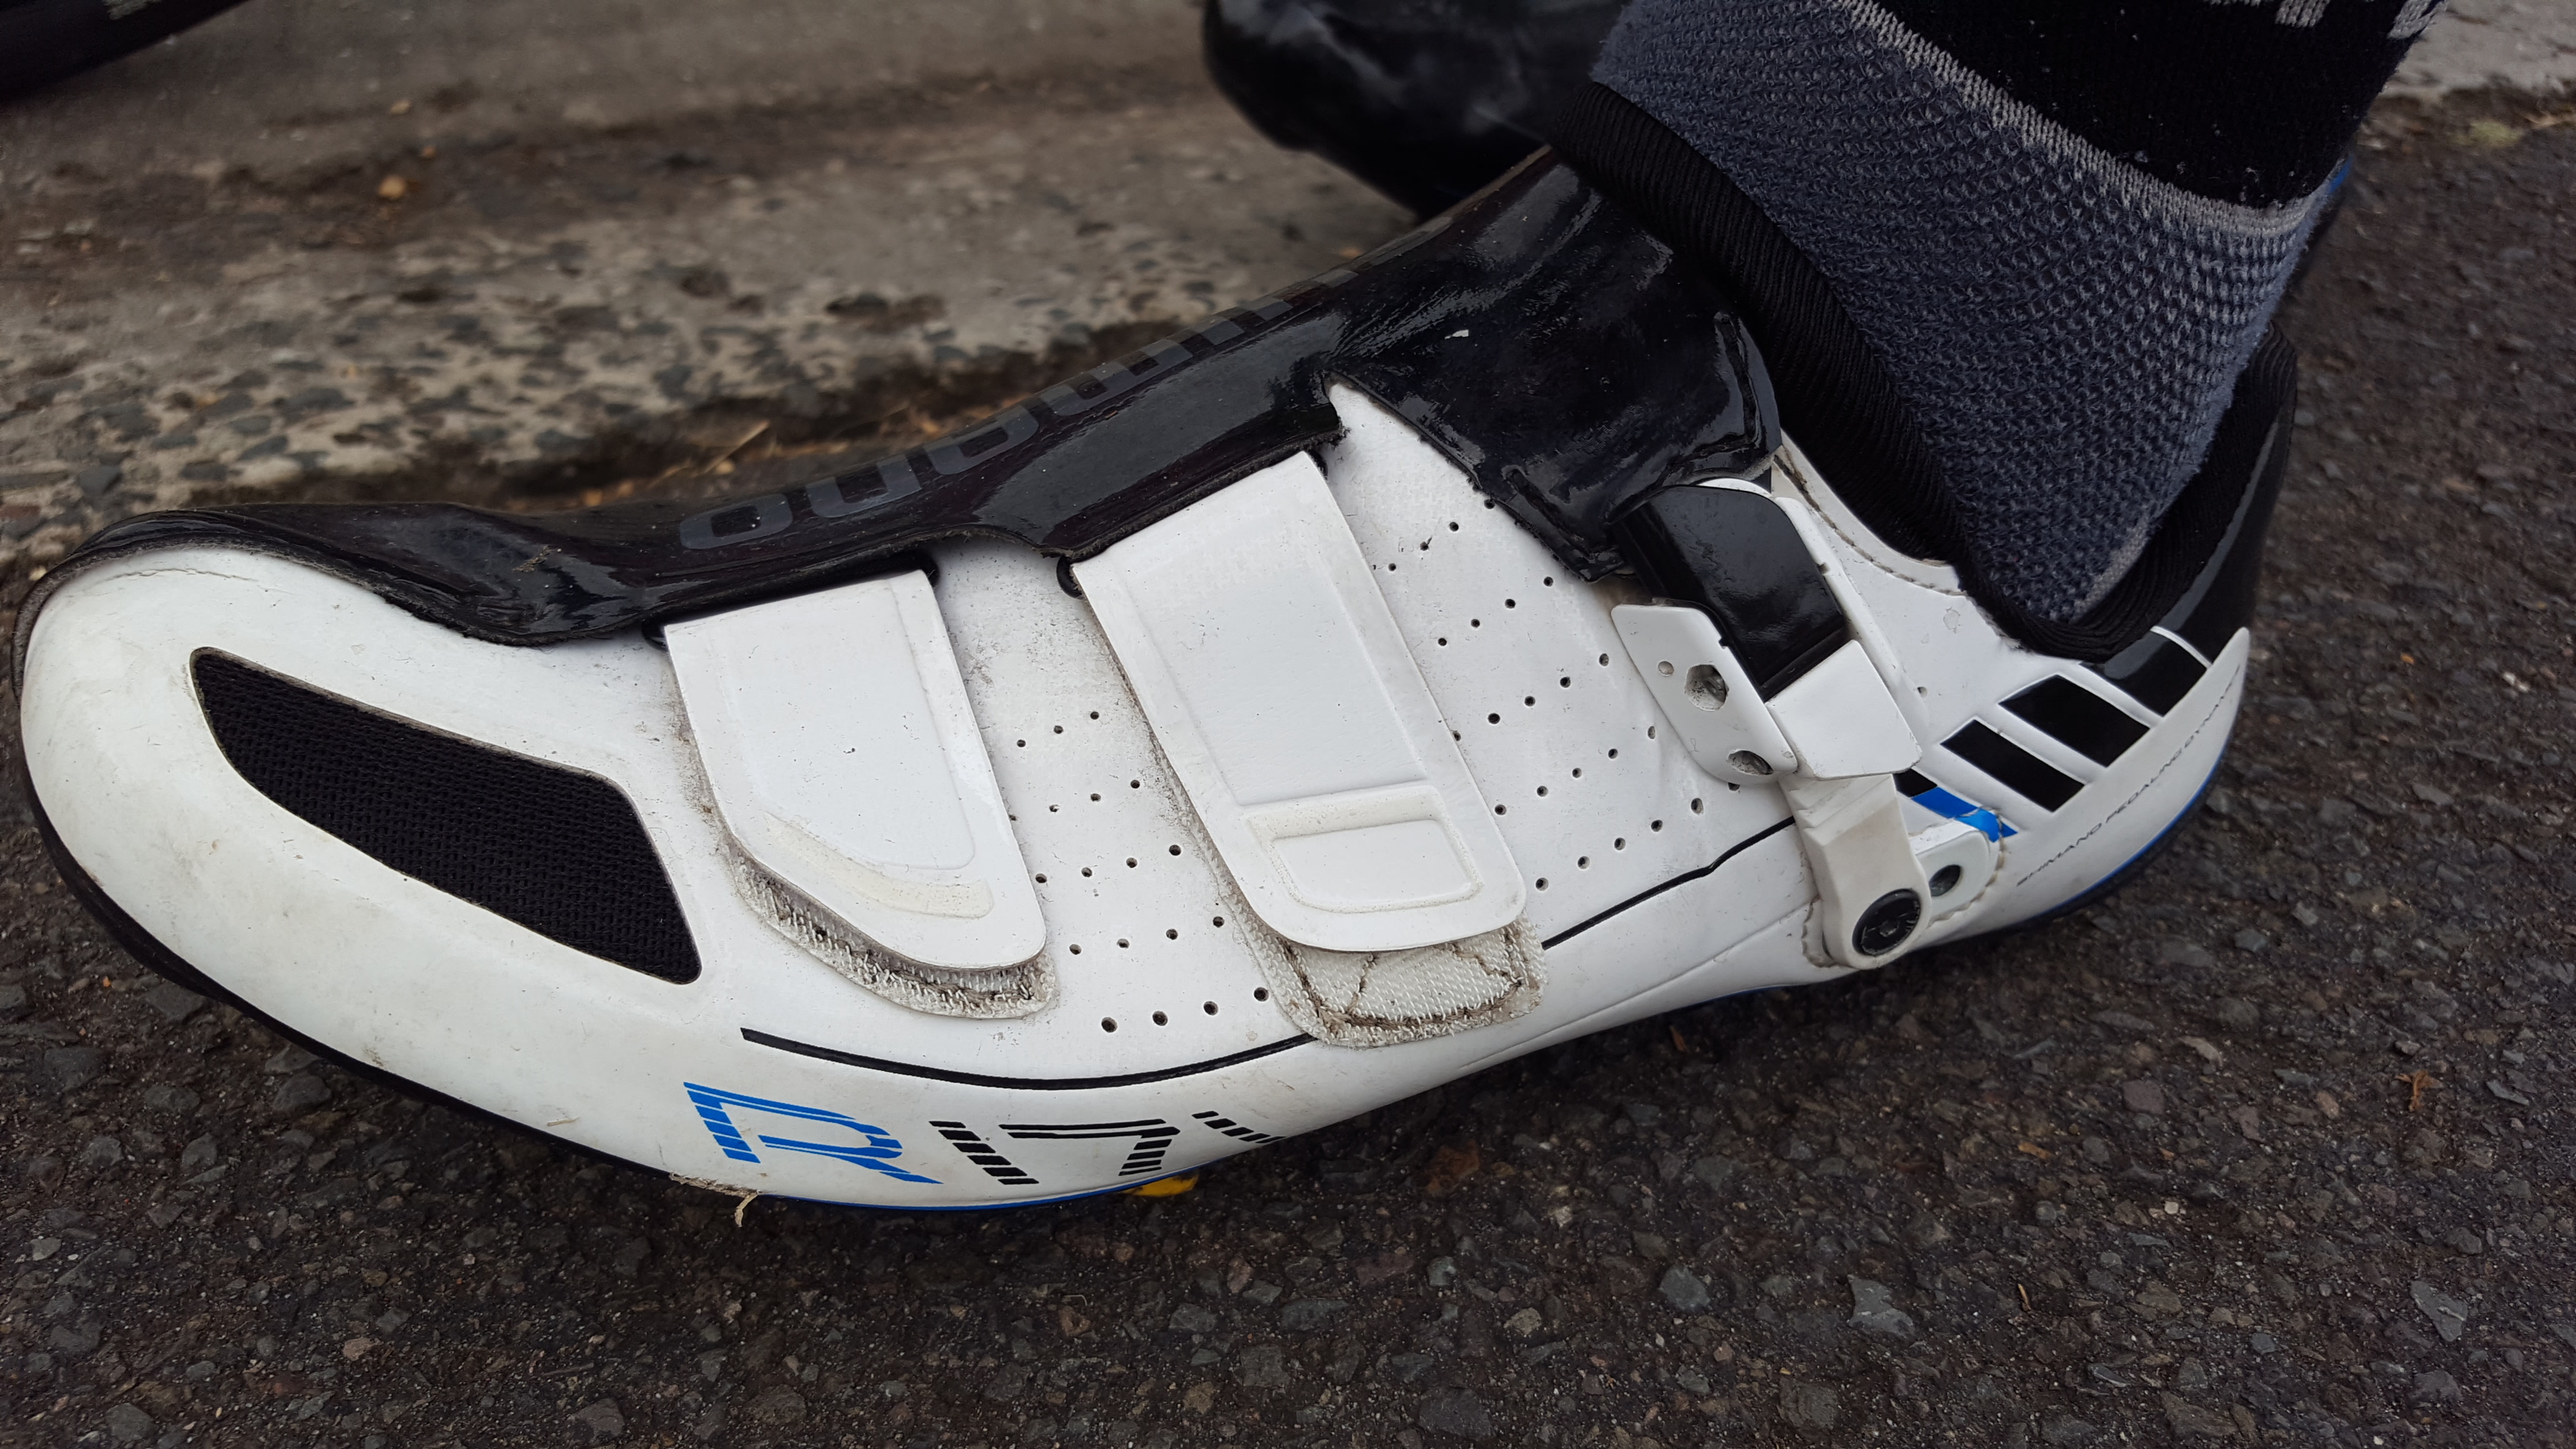 2000km on: Shimano R171 road shoes 